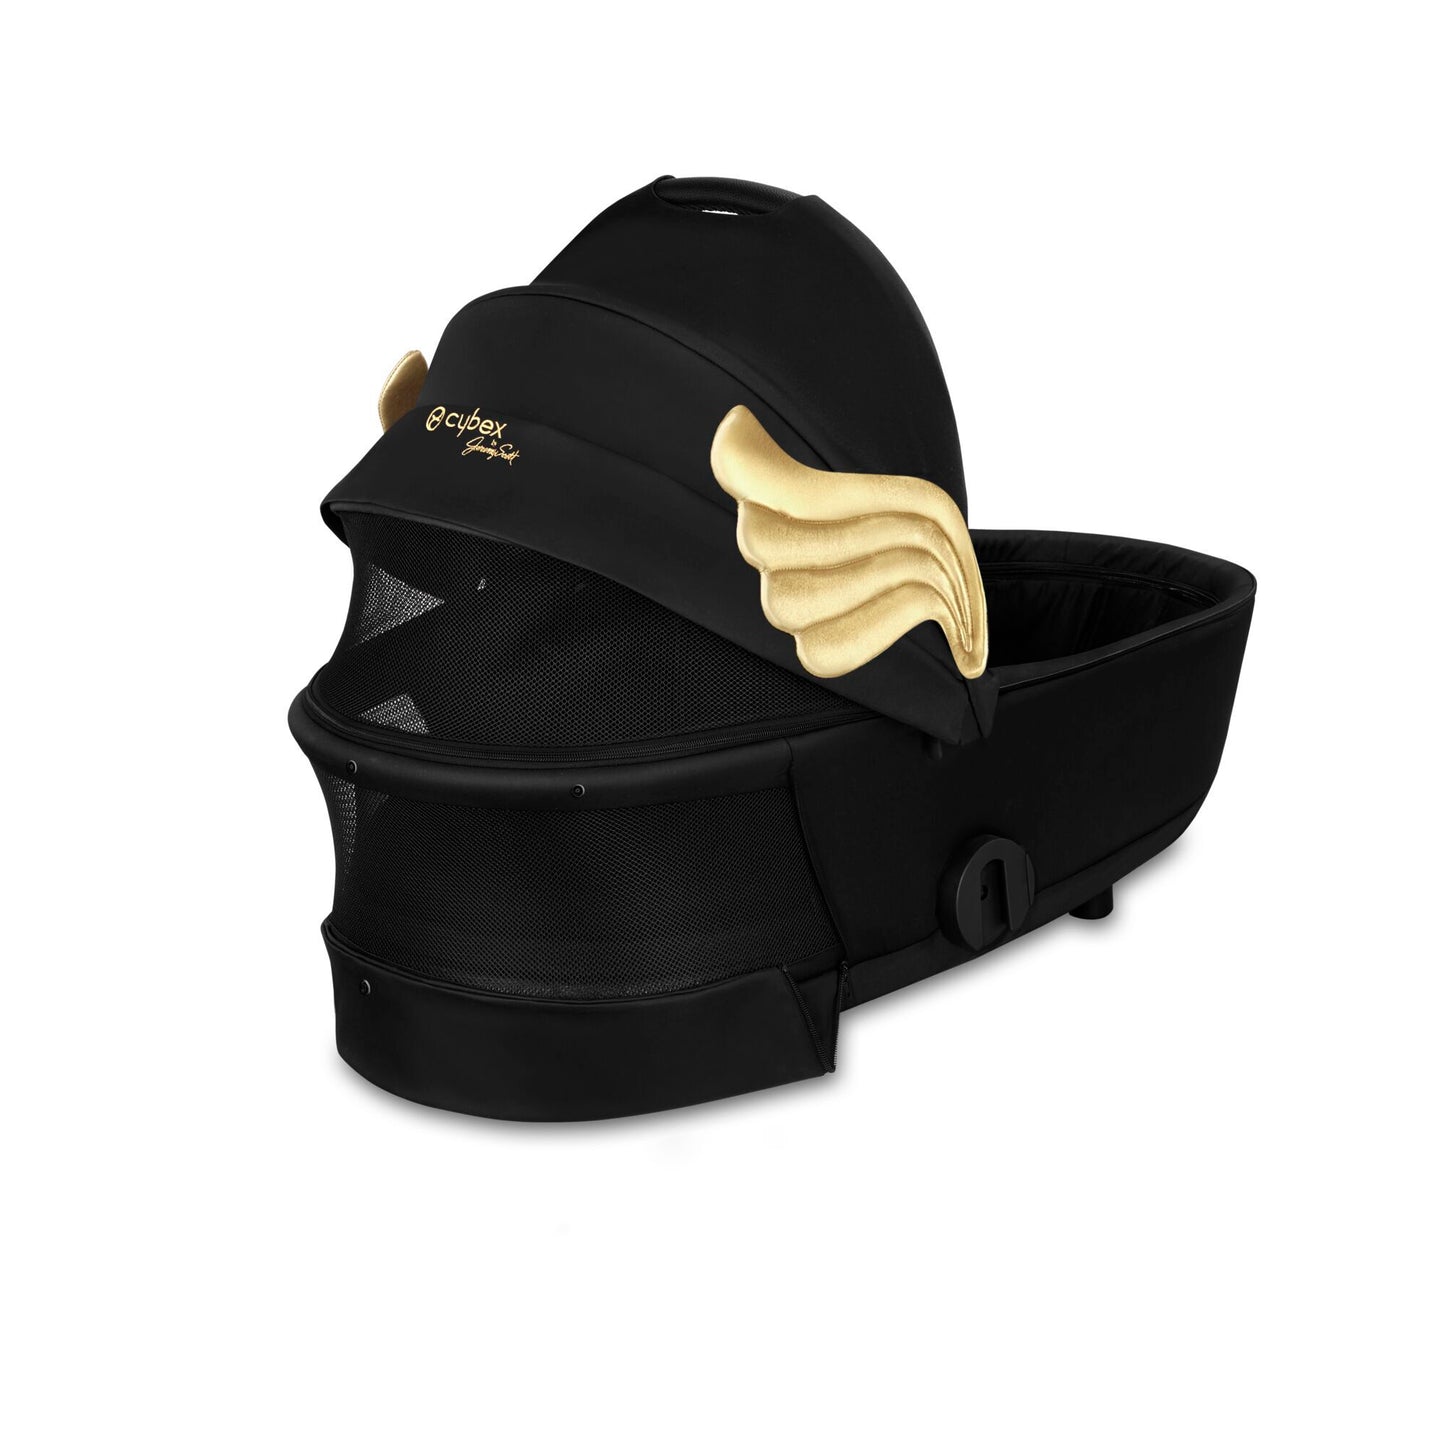 Navicella Mios Lux Carry Cot_ Collezione Wings by Jeremy Scott